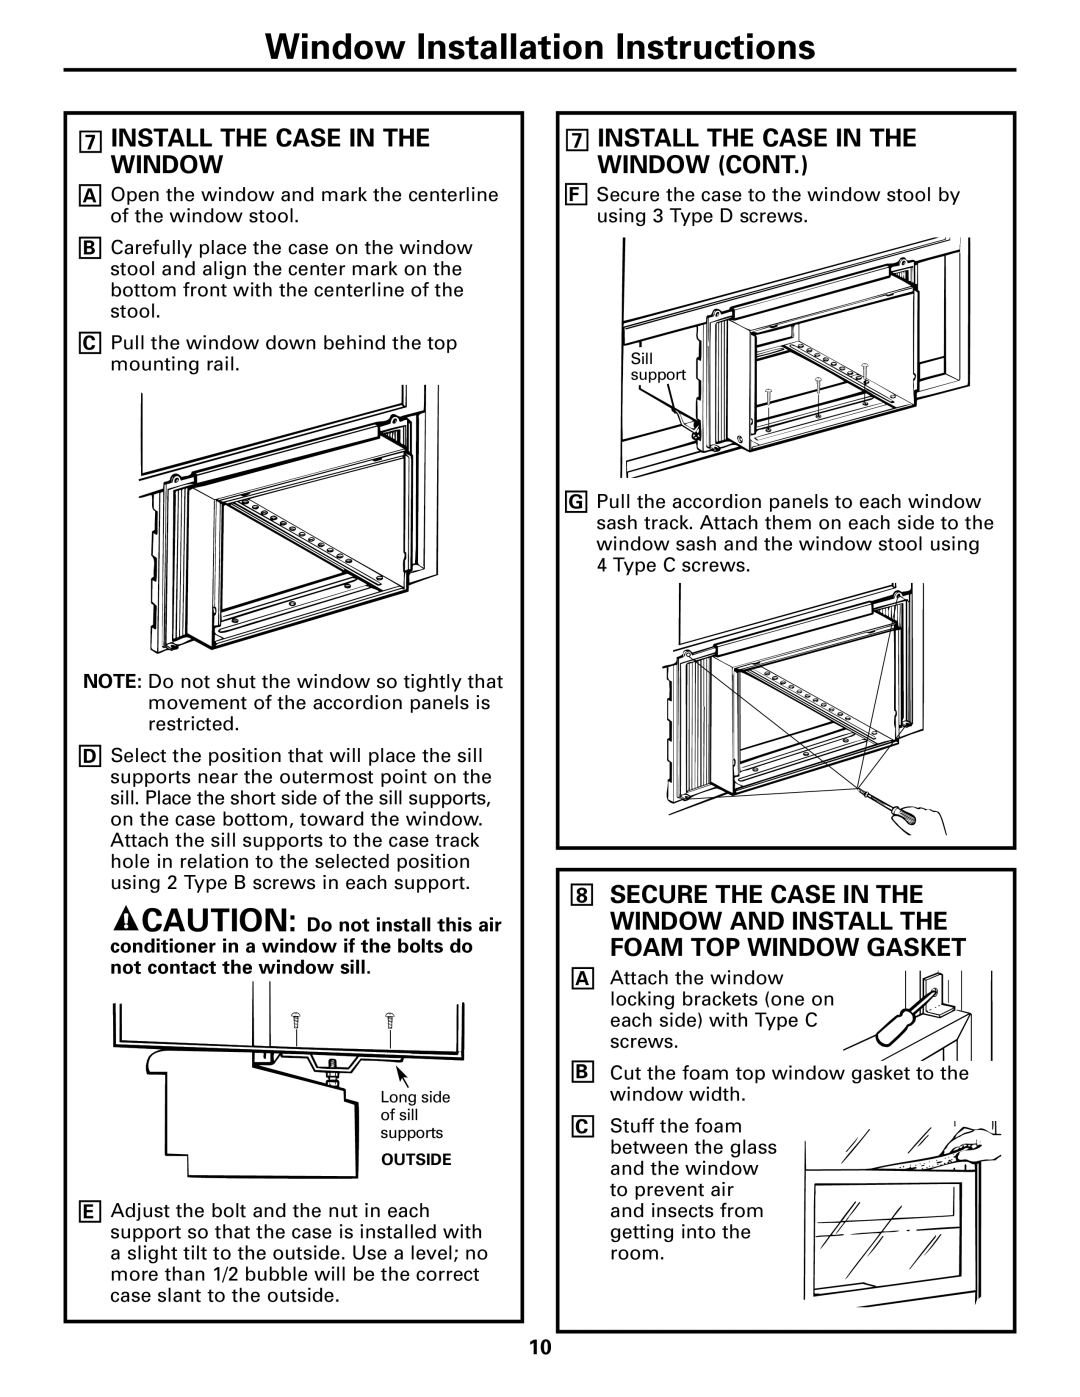 GE AEE08, AEE12 7INSTALL THE CASE IN THE WINDOW CONT, Window Installation Instructions, Outside 